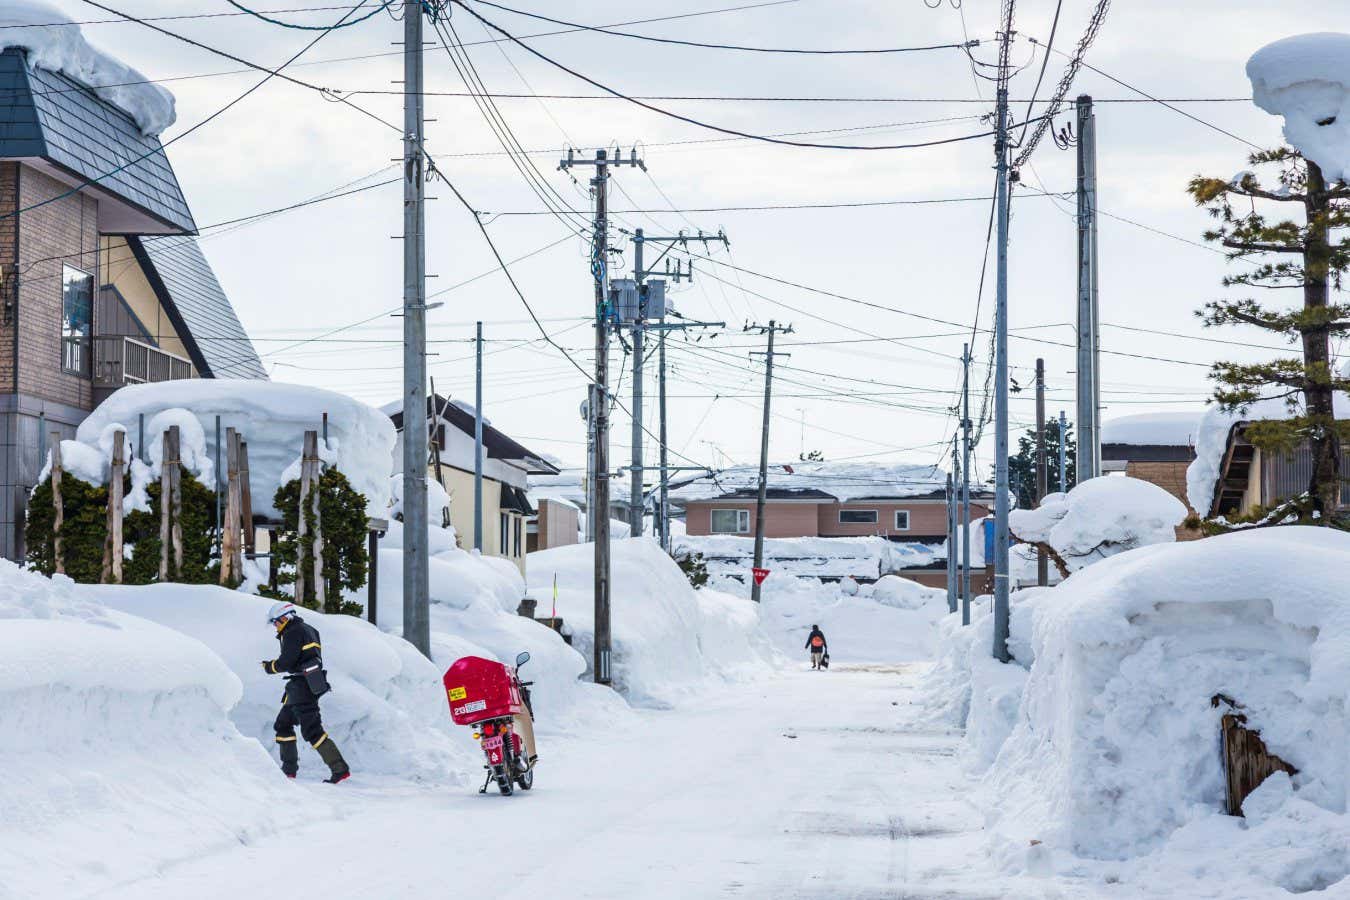 Snow and rising sea levels may have triggered Japan's earthquake swarm